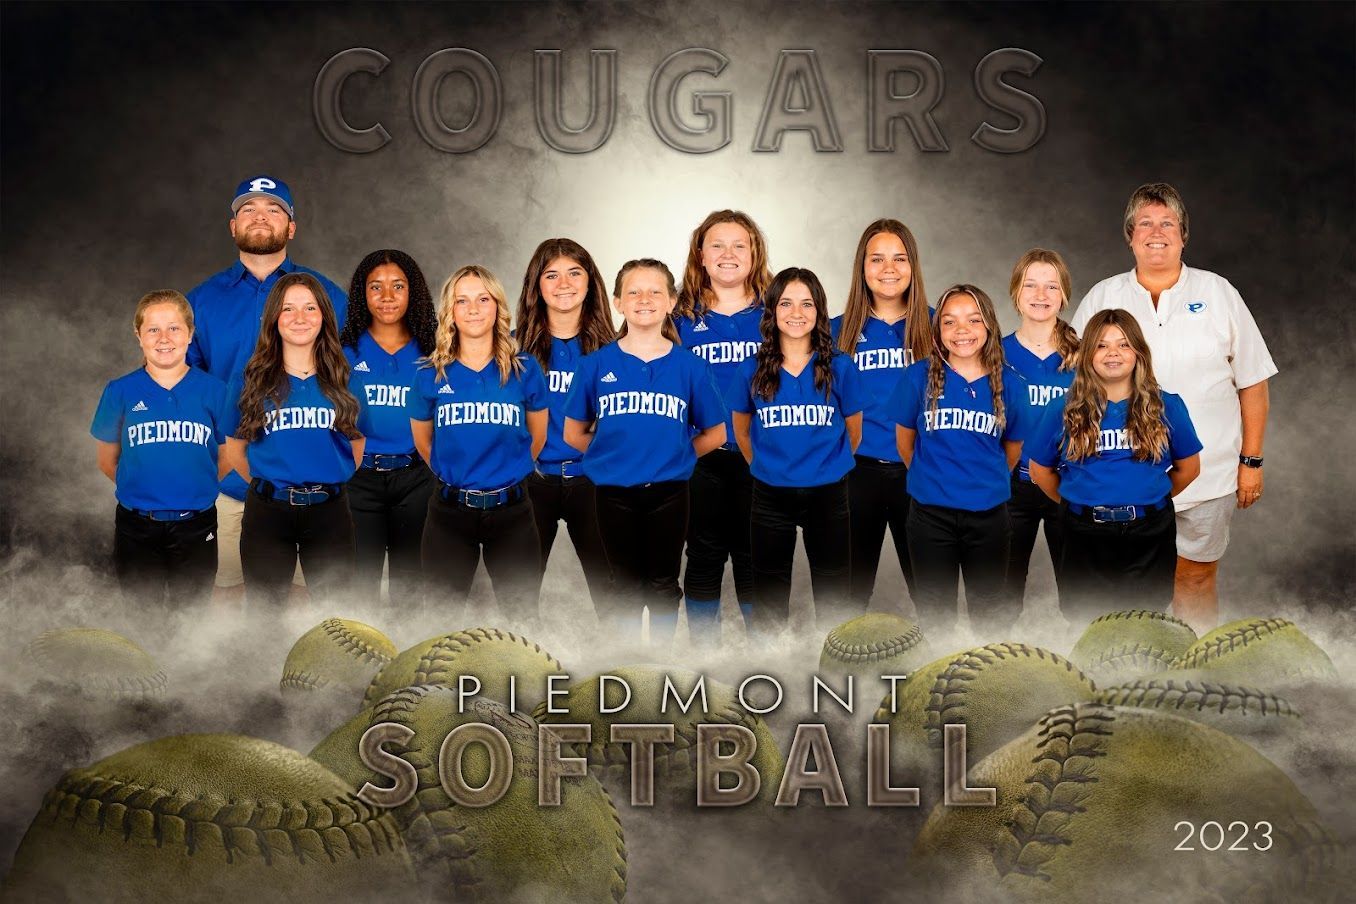 the cougars softball team is posing for a picture .